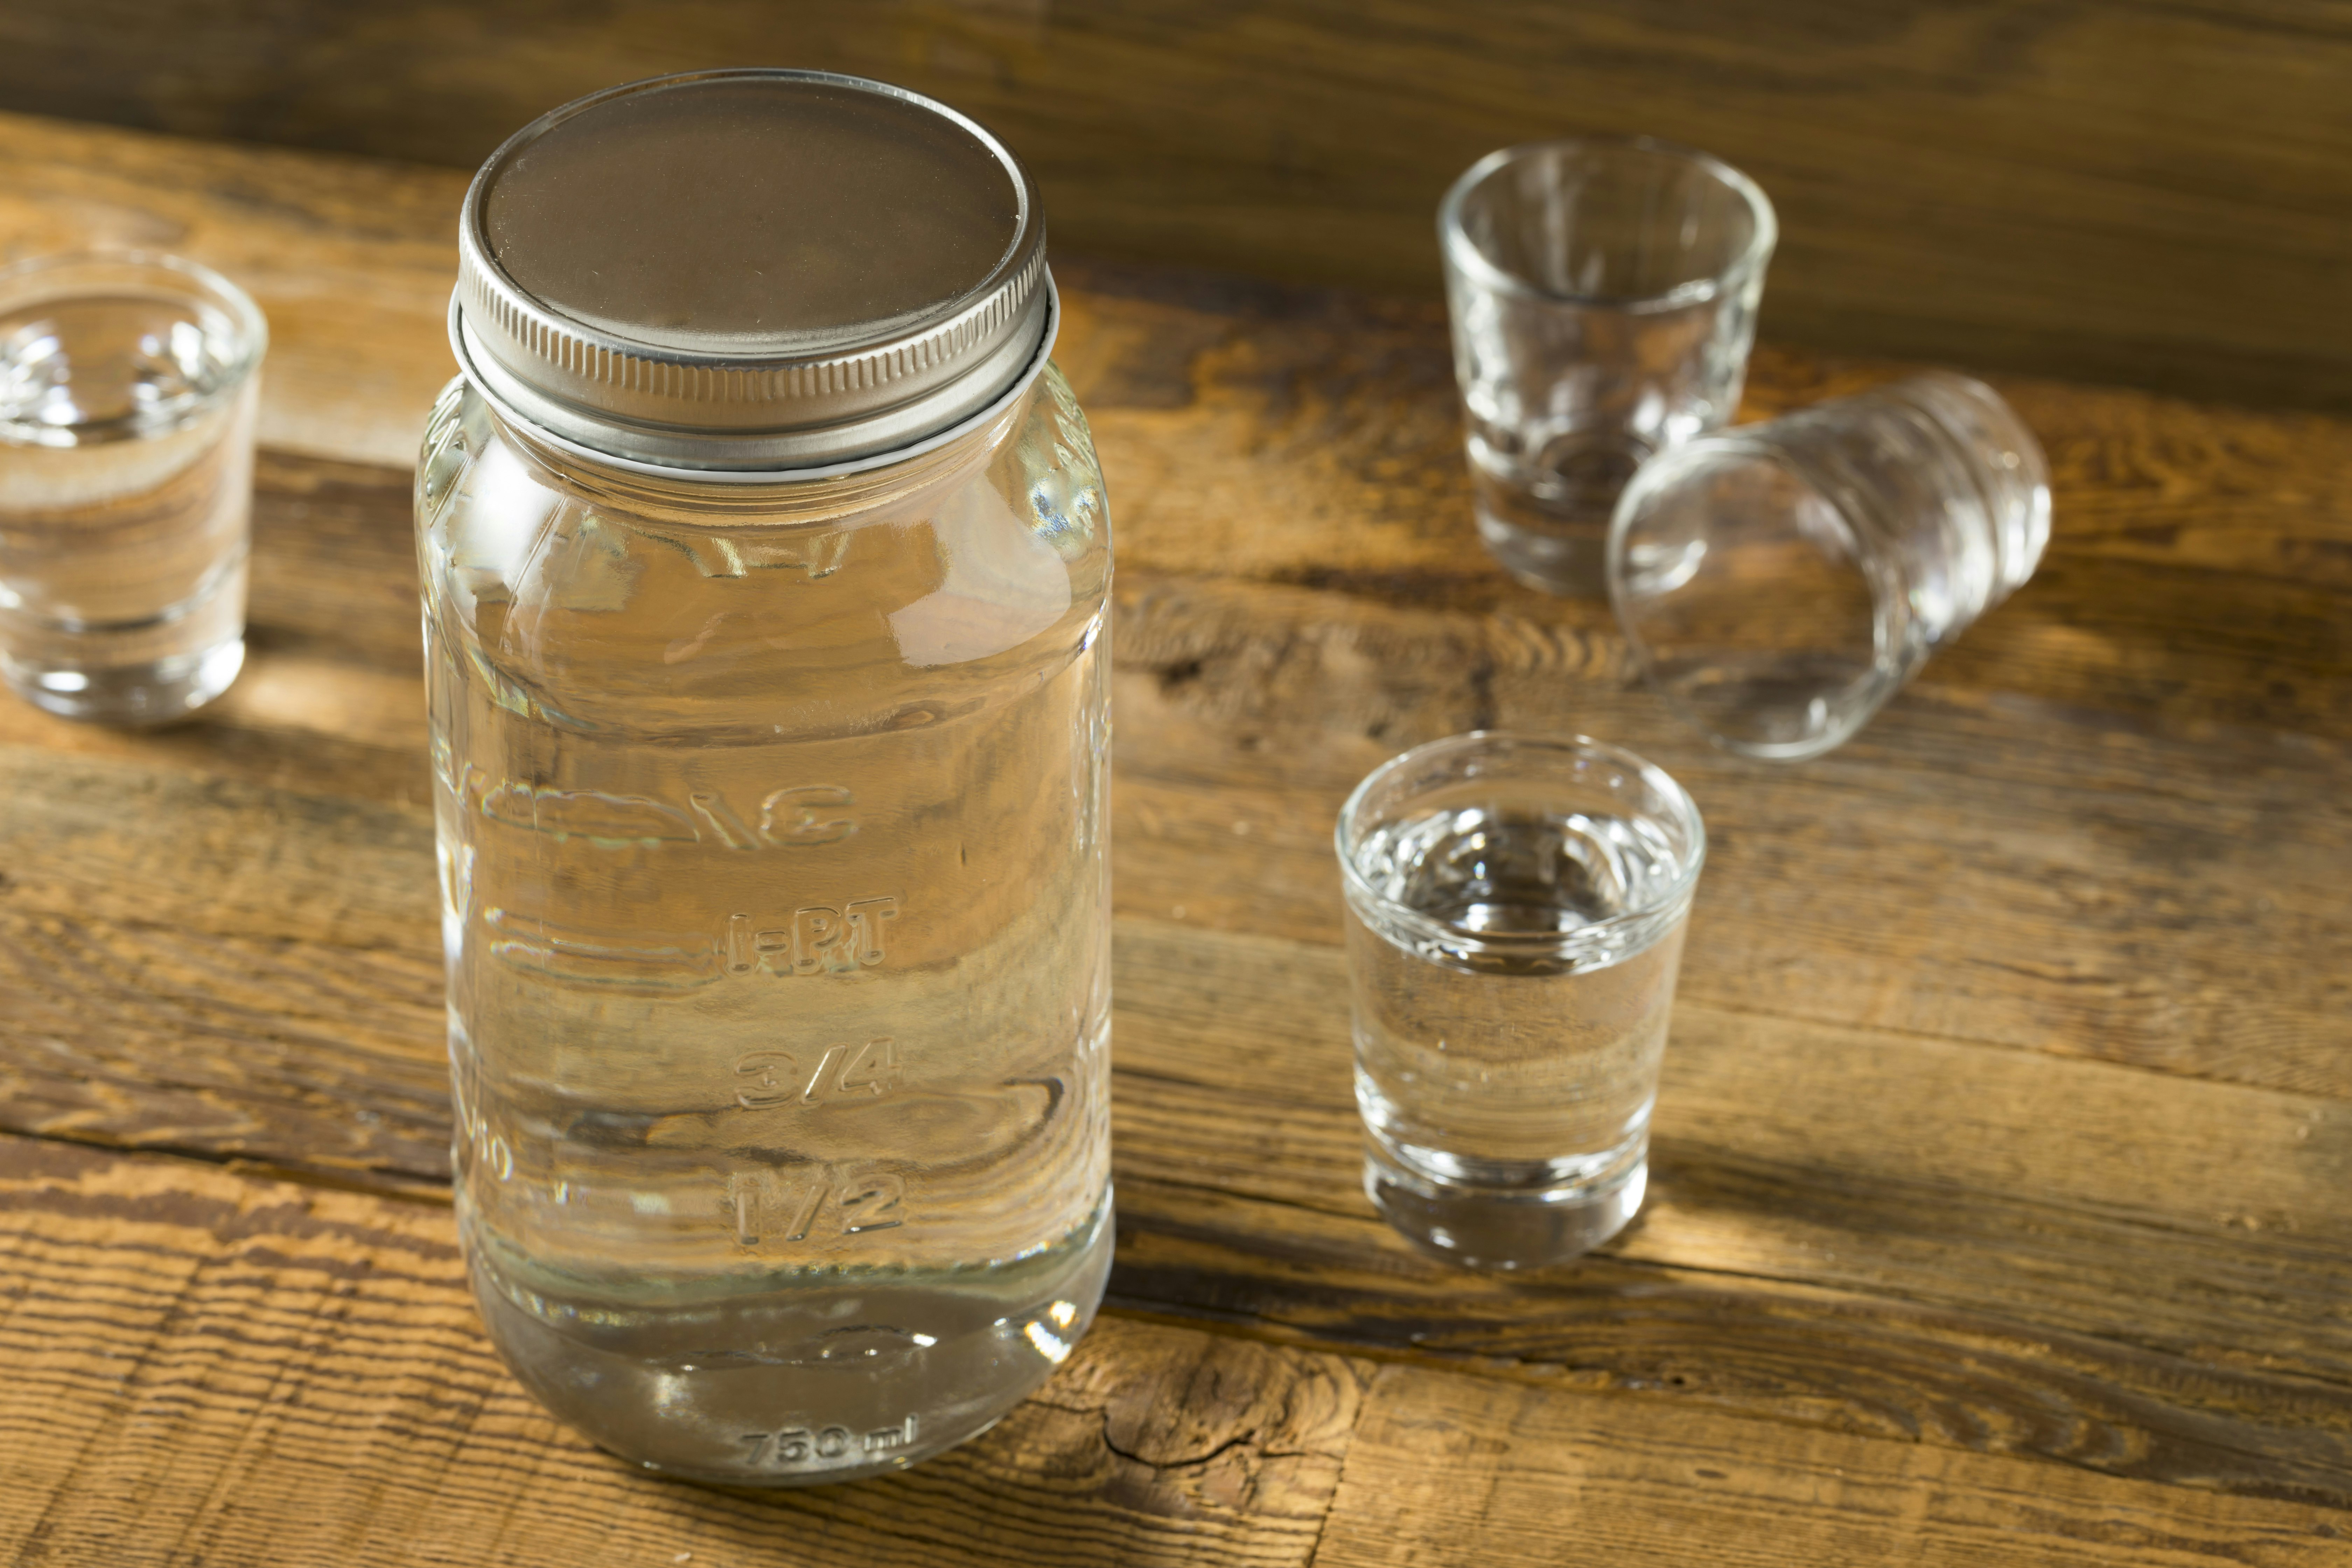 A mason jar filled with a clear liquid. There are two shot glasses filled with the clear liquid. There is one empty shot glass and another empty shot glass lying on its side. 